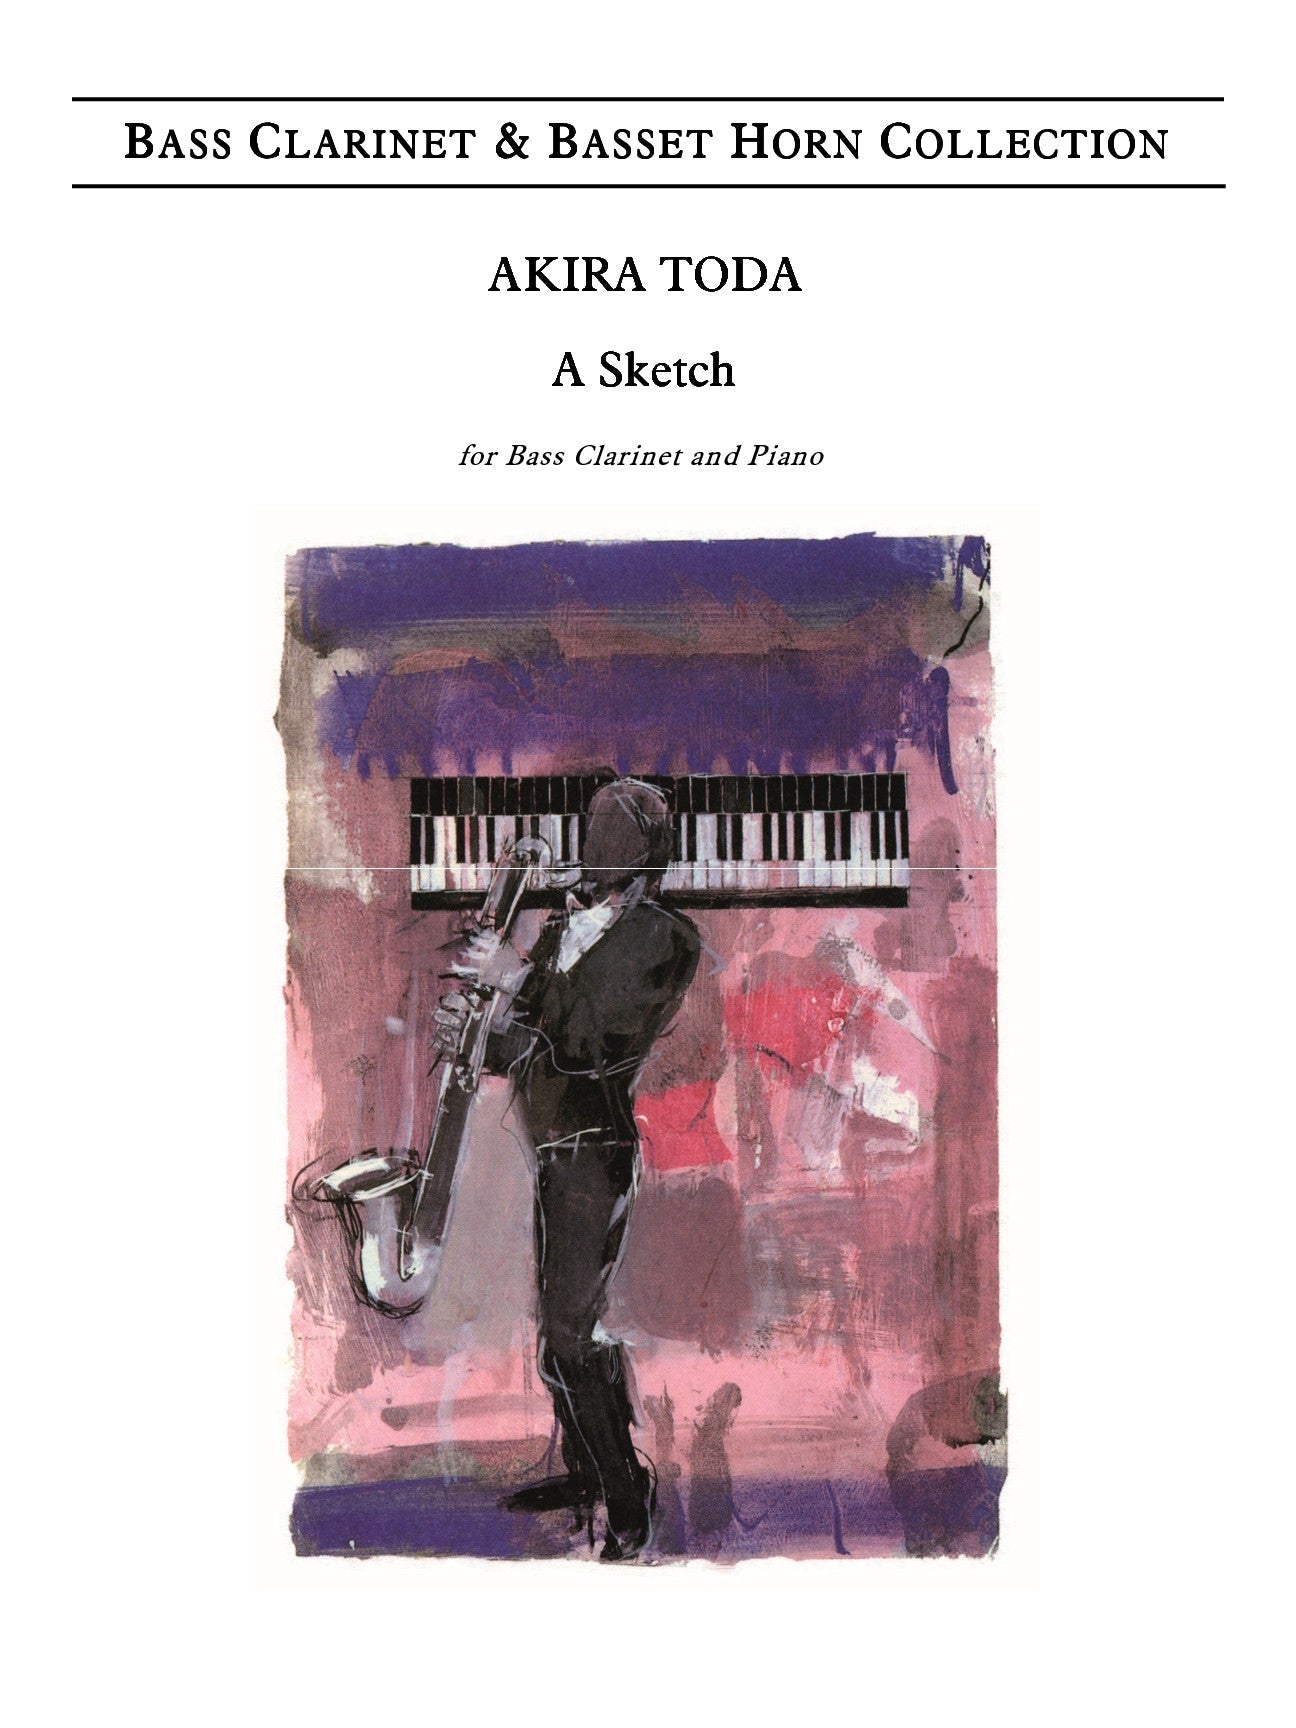 Toda - A Sketch for Bass Clarinet and Piano